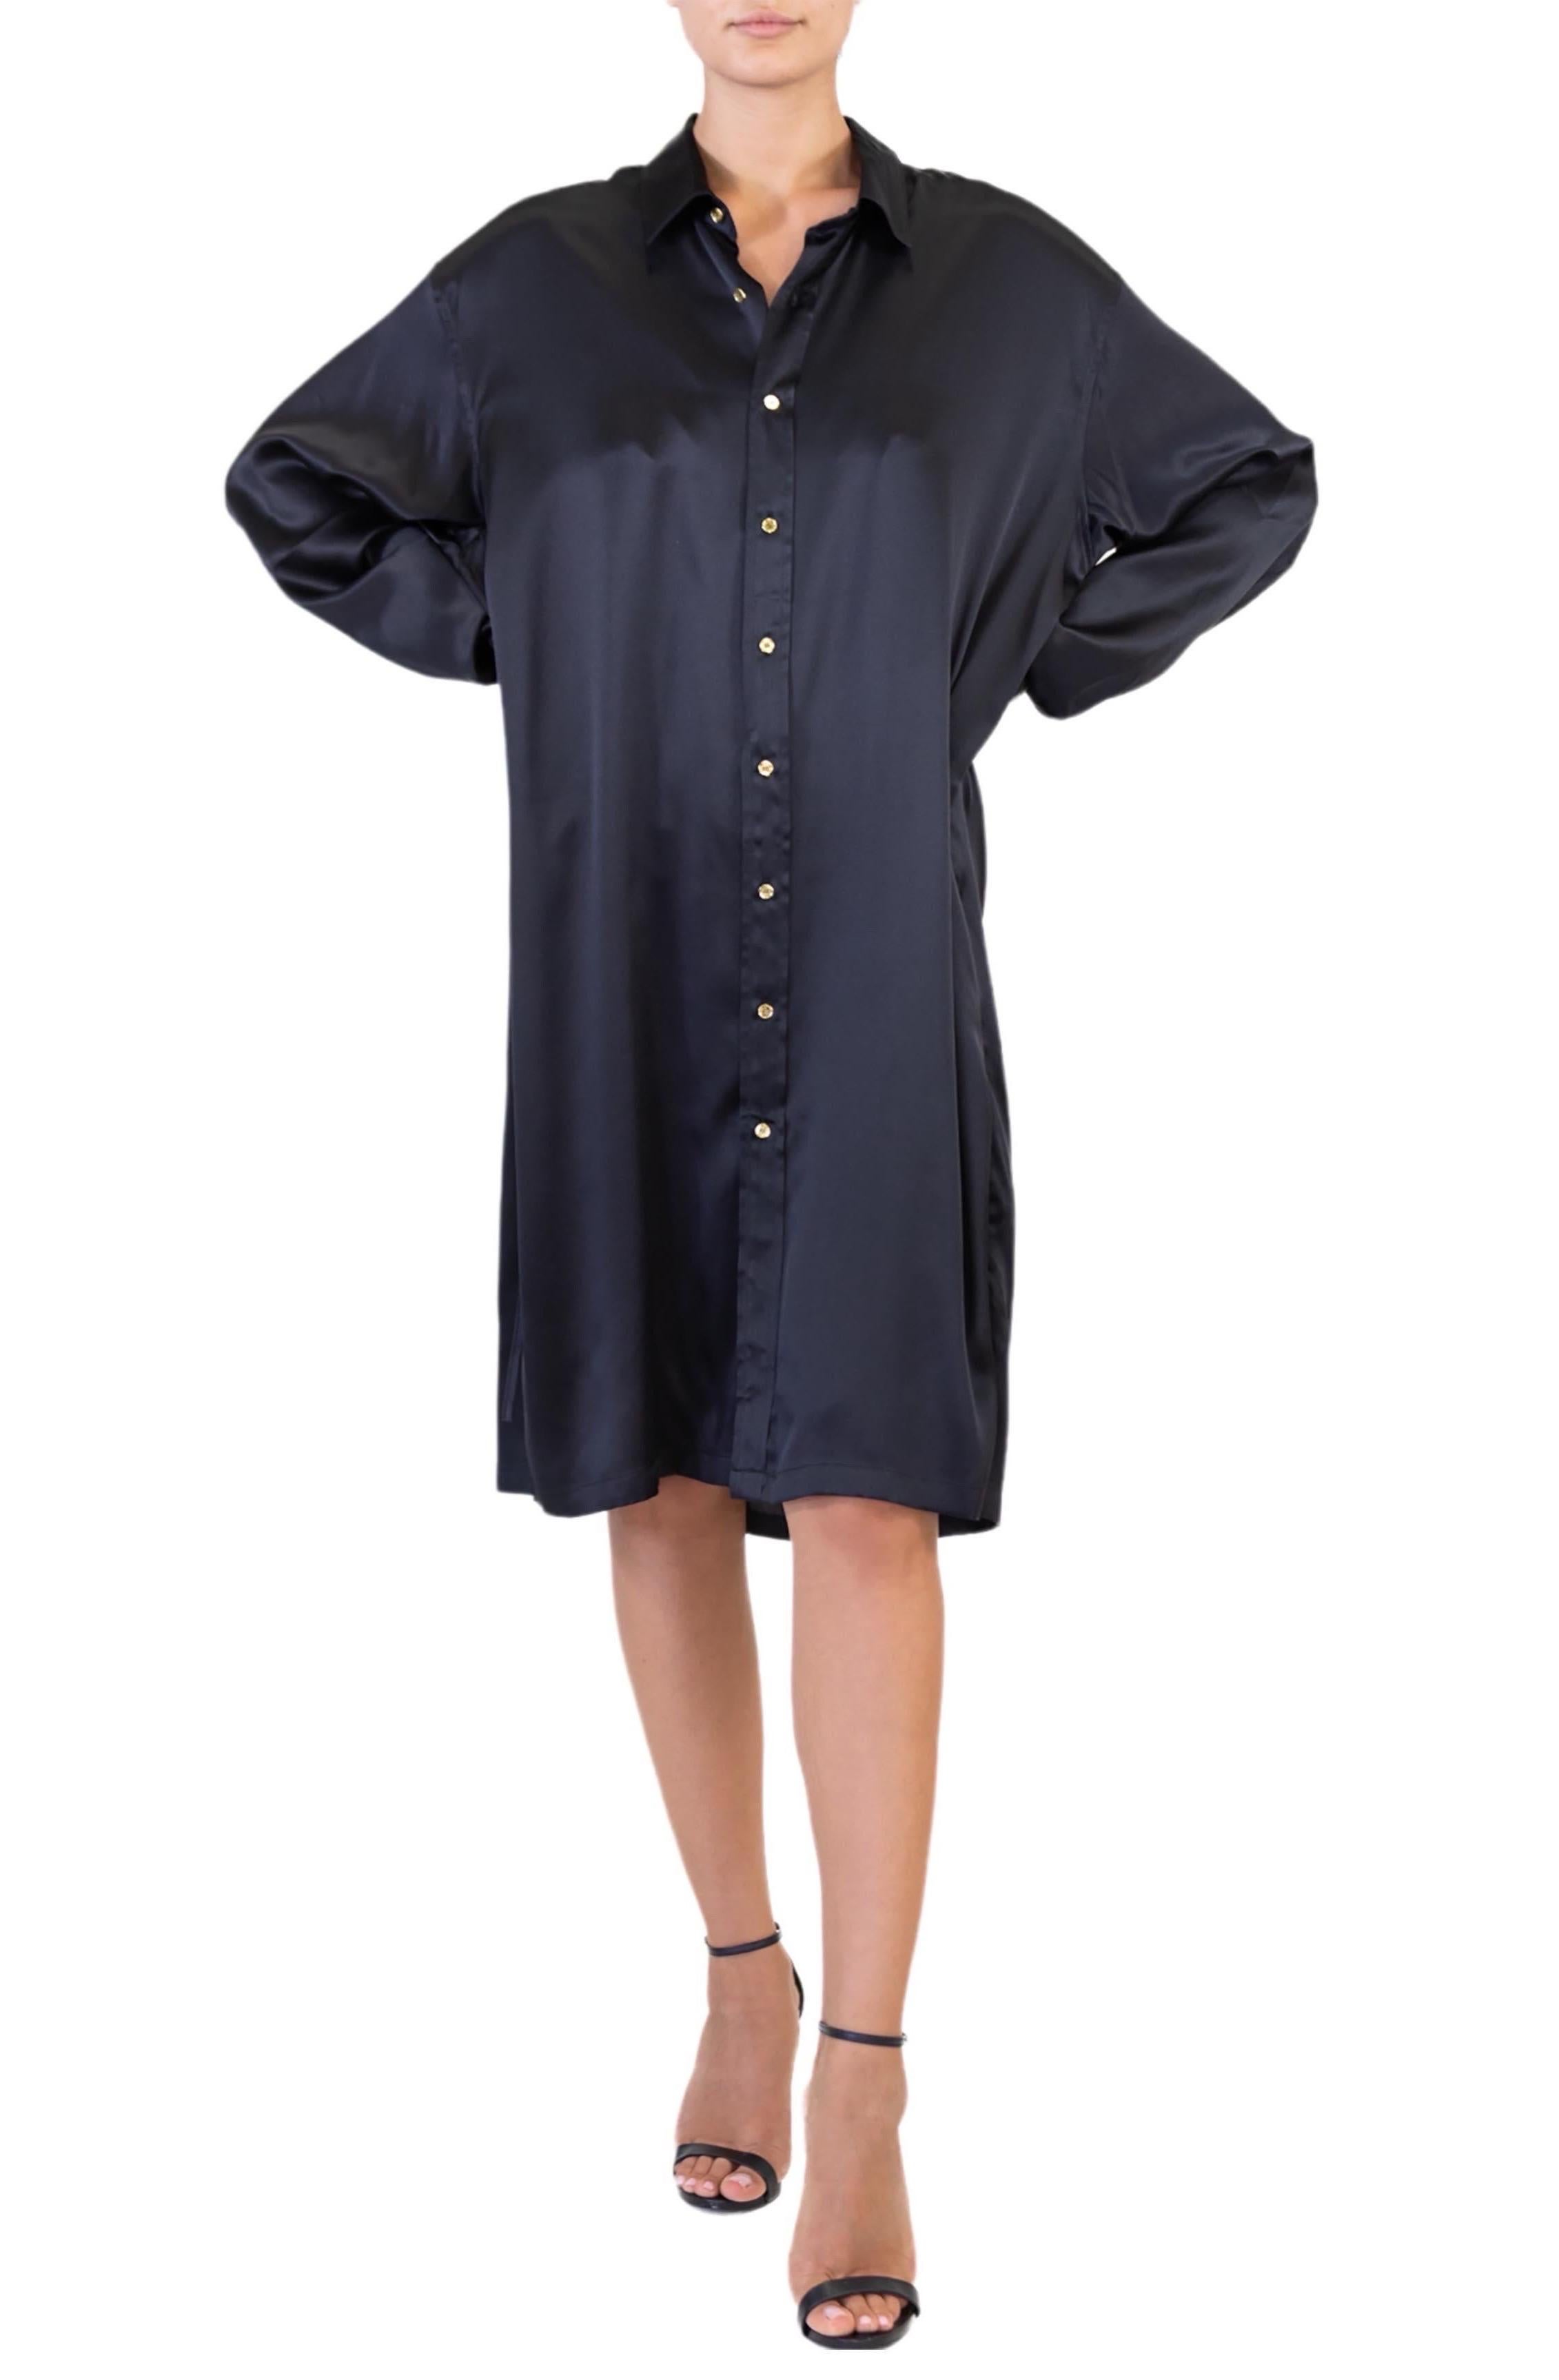 MORPHEW COLLECTION Black Silk Charmeuse Oversized Button Down Shirt Dress In Excellent Condition For Sale In New York, NY